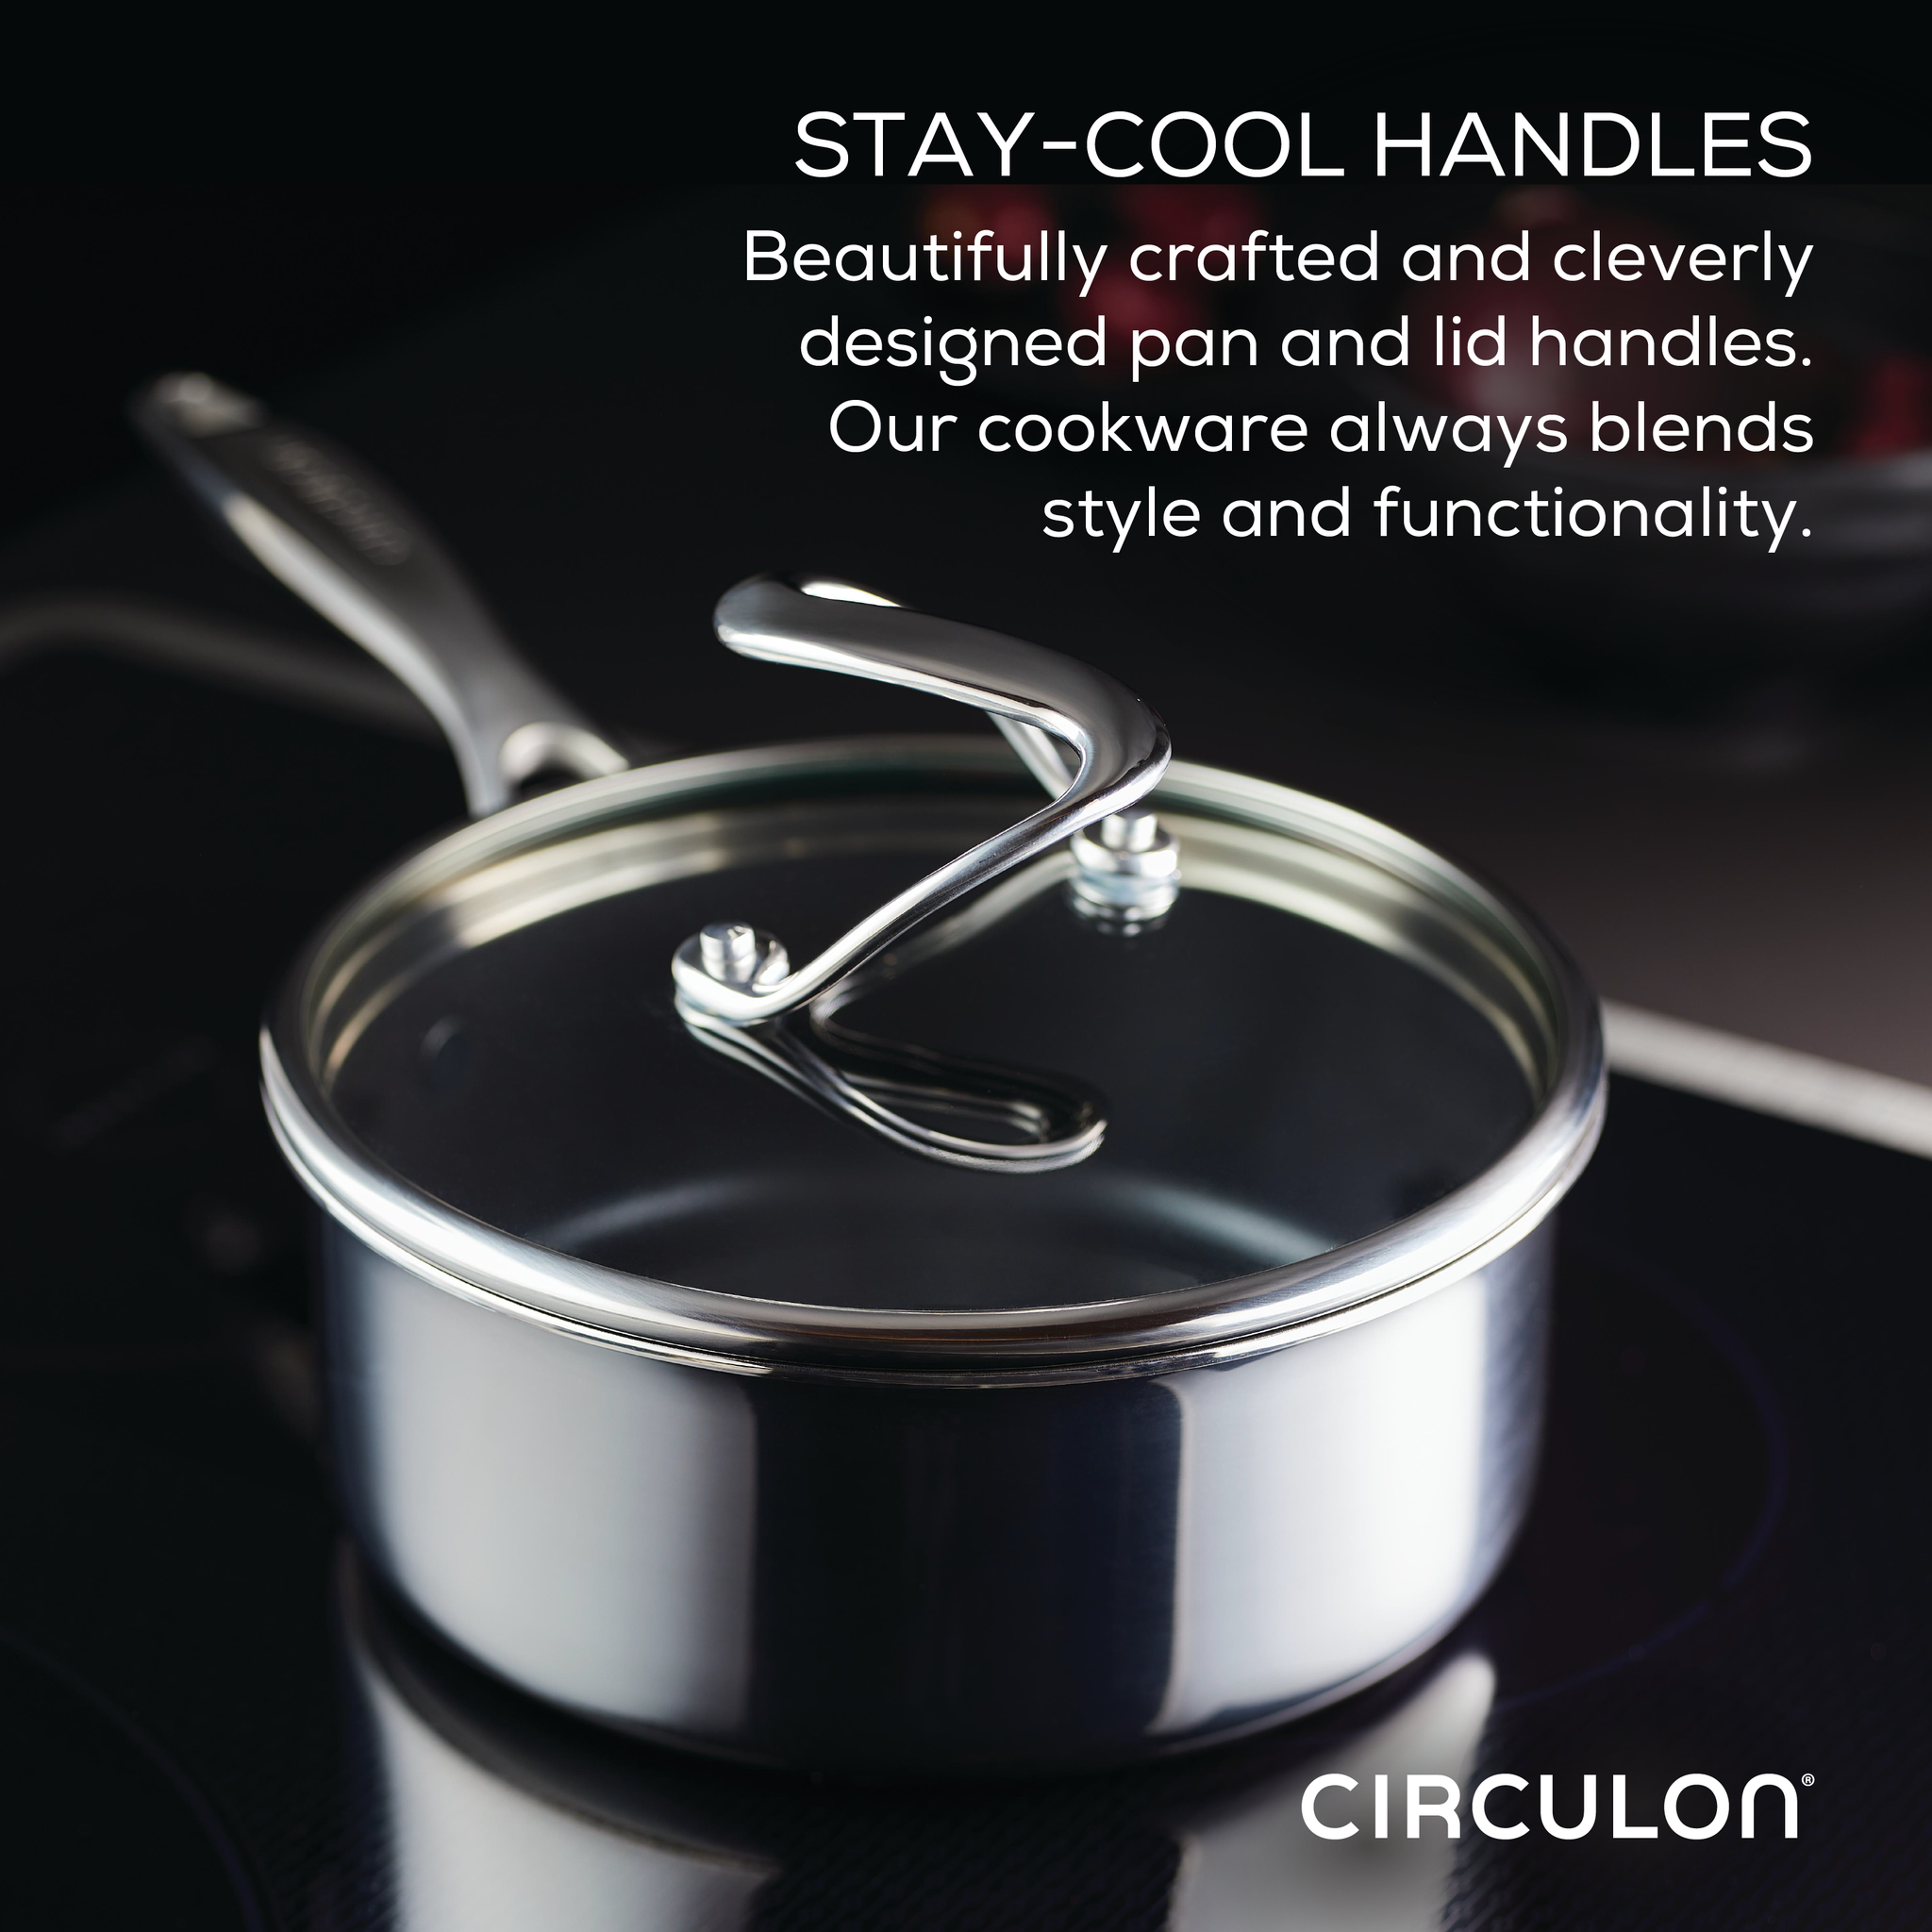 Calphalon 8-Piece Pots and Pans Set, Stainless Steel Kitchen Cookware with  Stay-Cool Handles, Dishwasher Safe, Silver